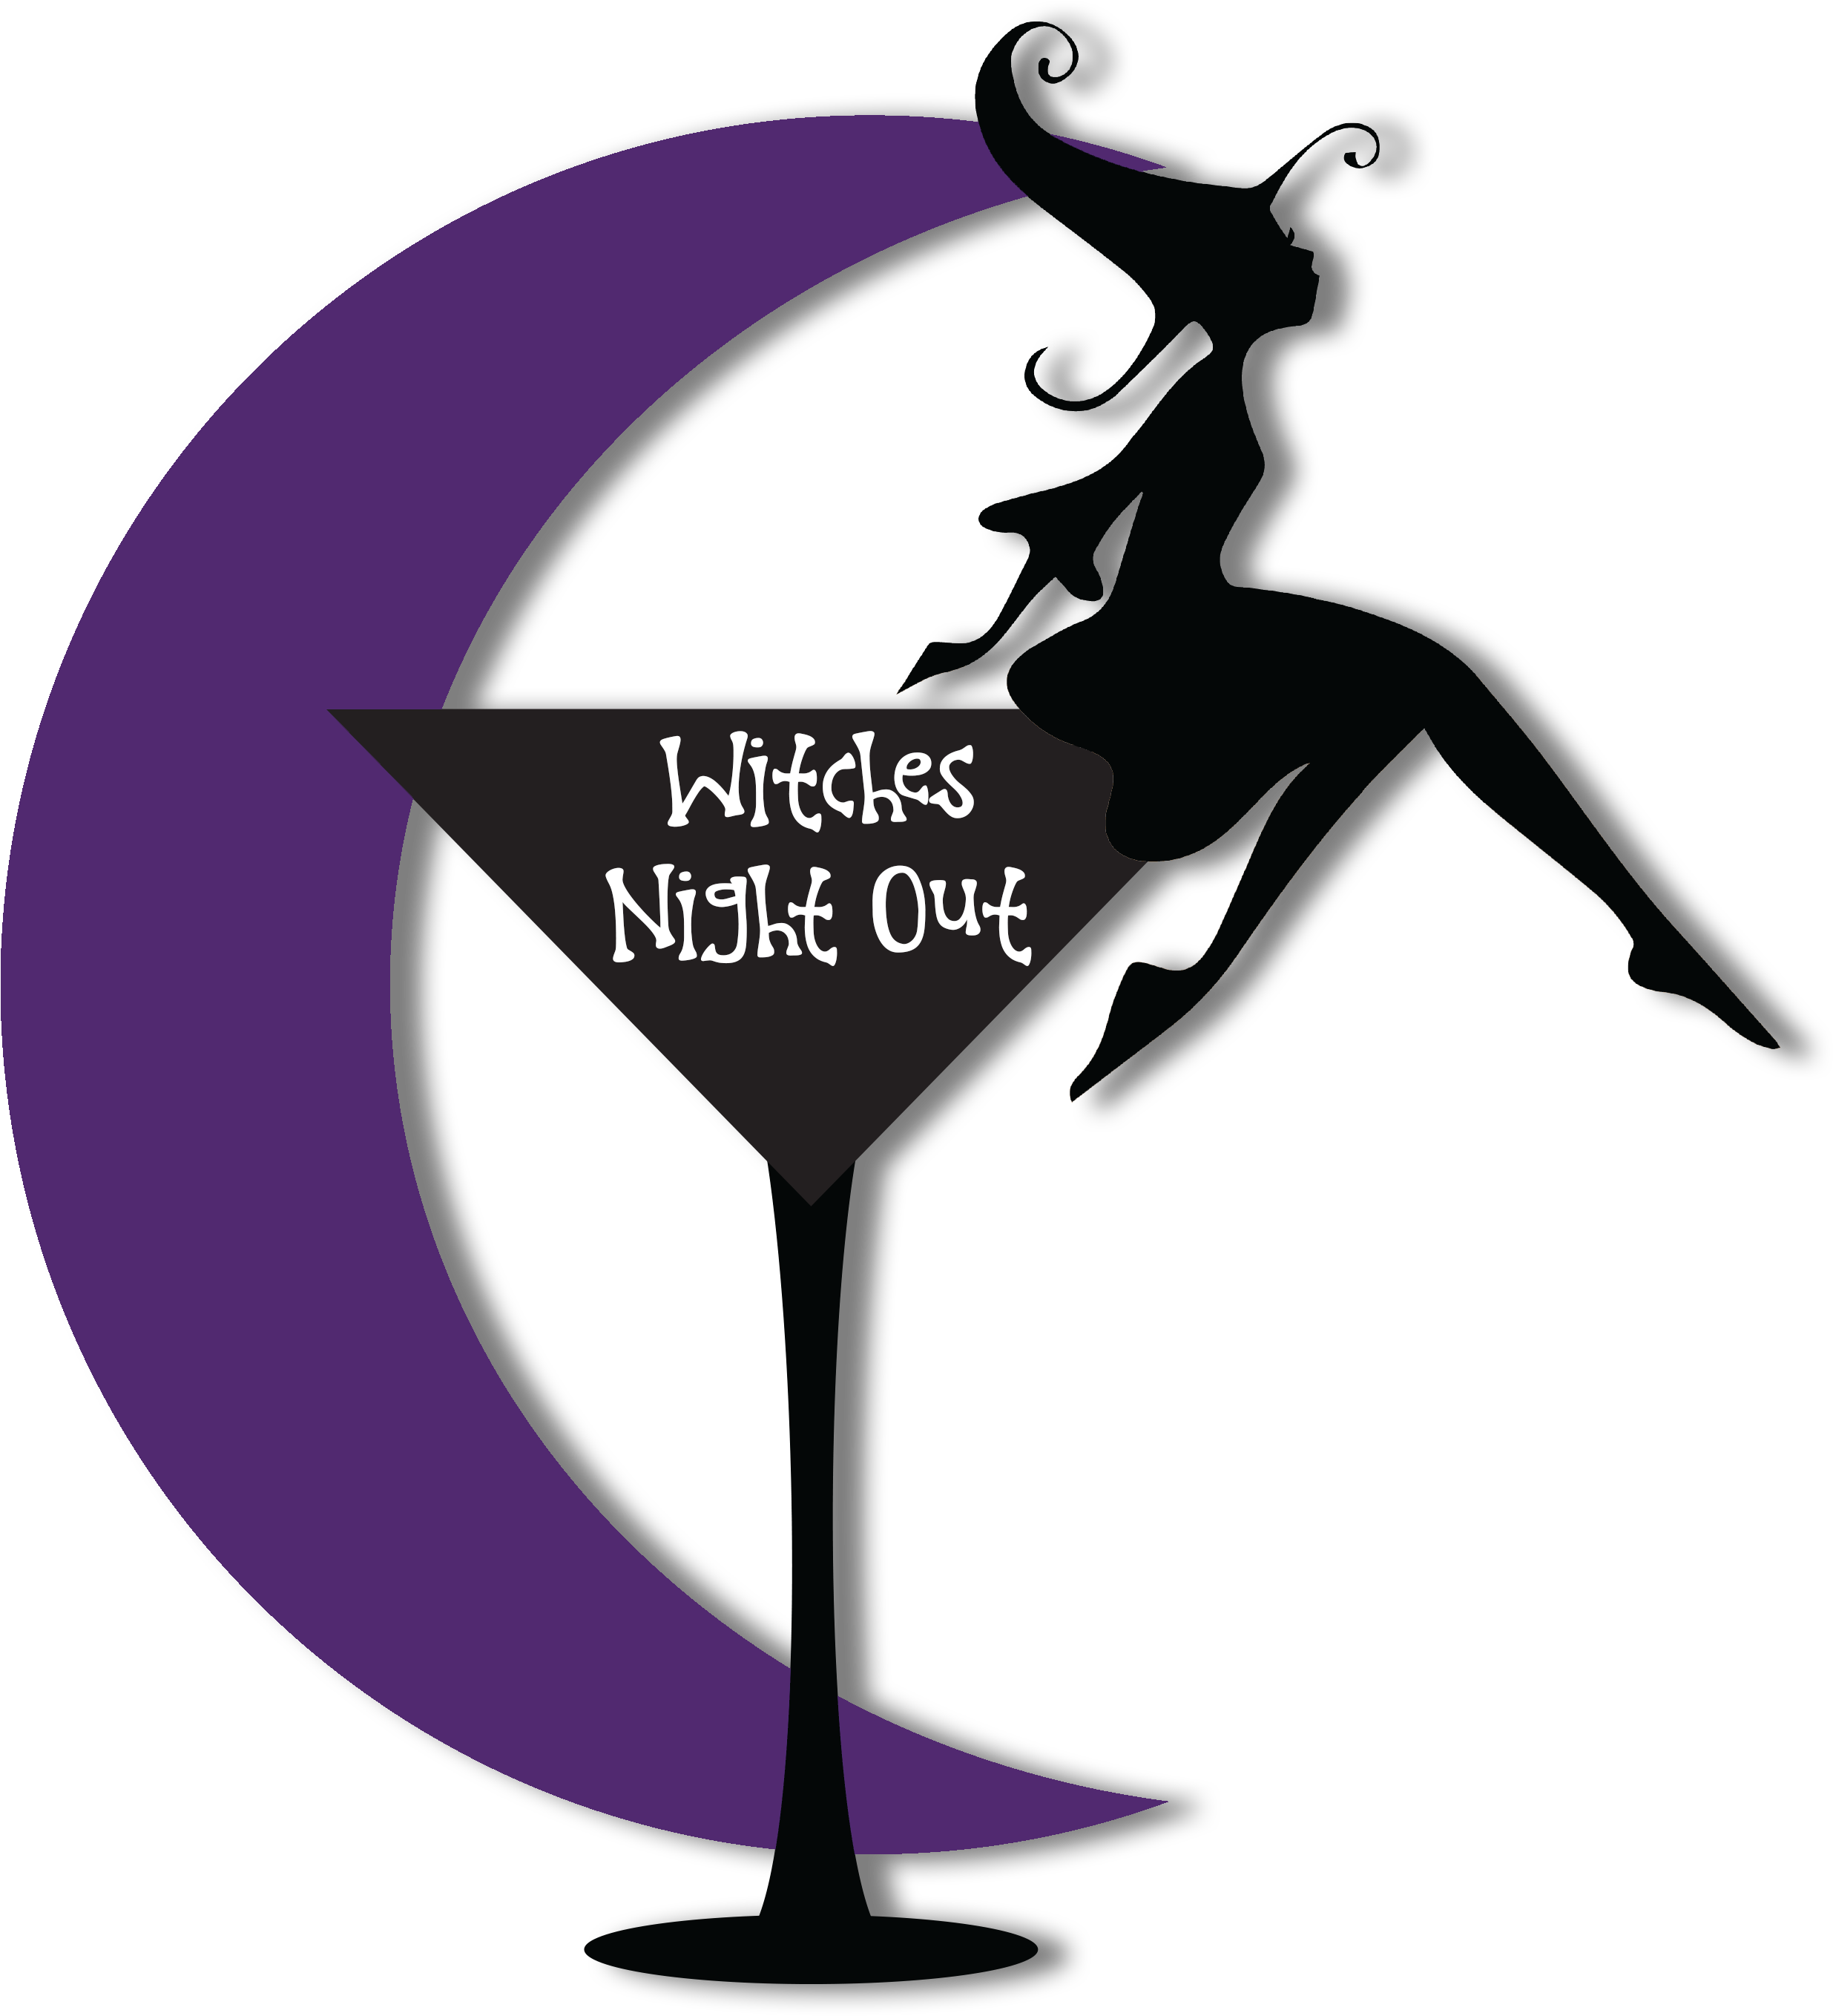 Witches Night Out - Witches Night Out Png (2696x2945)